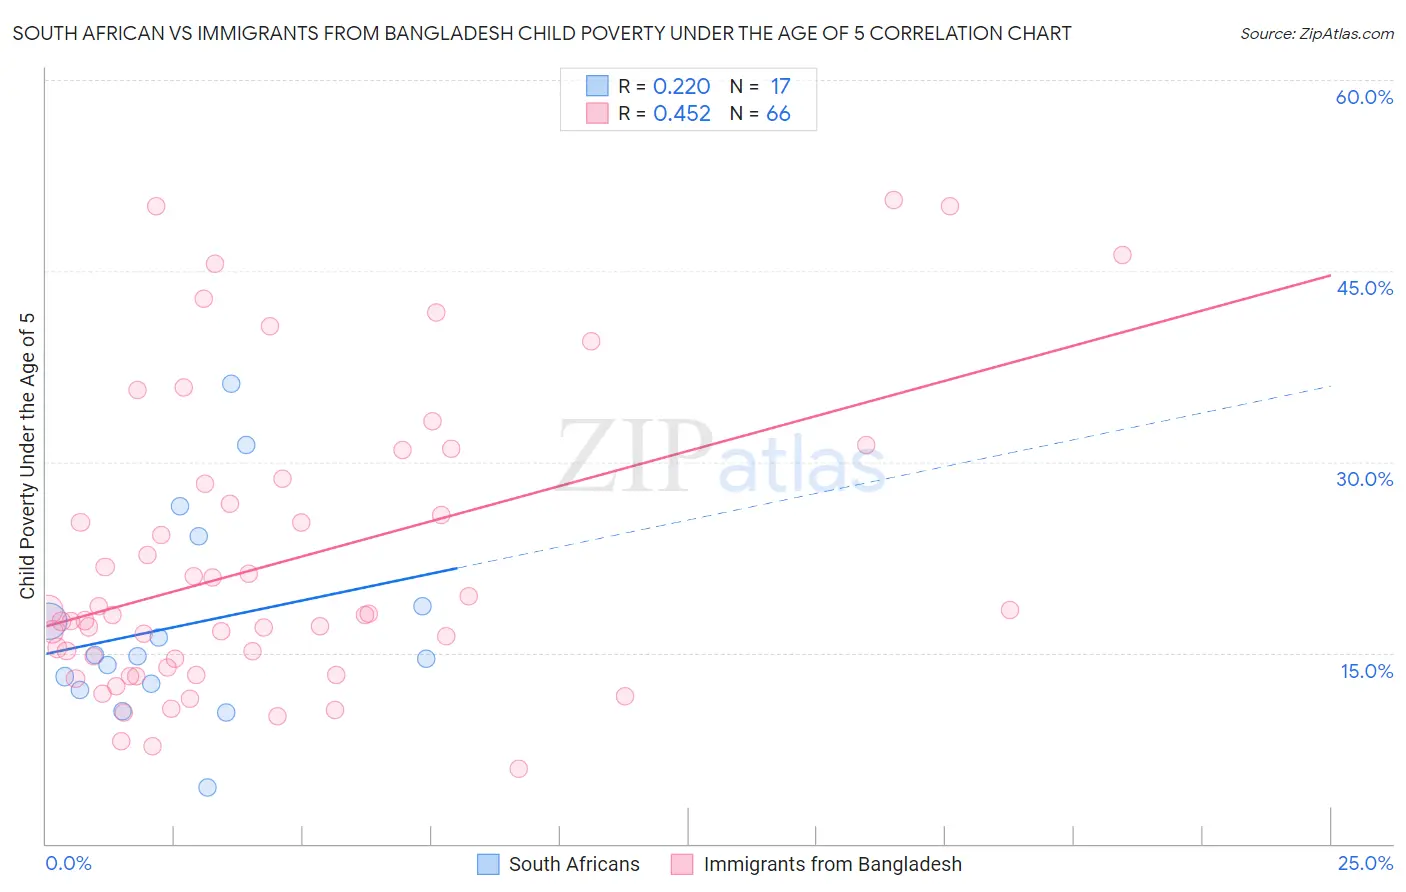 South African vs Immigrants from Bangladesh Child Poverty Under the Age of 5